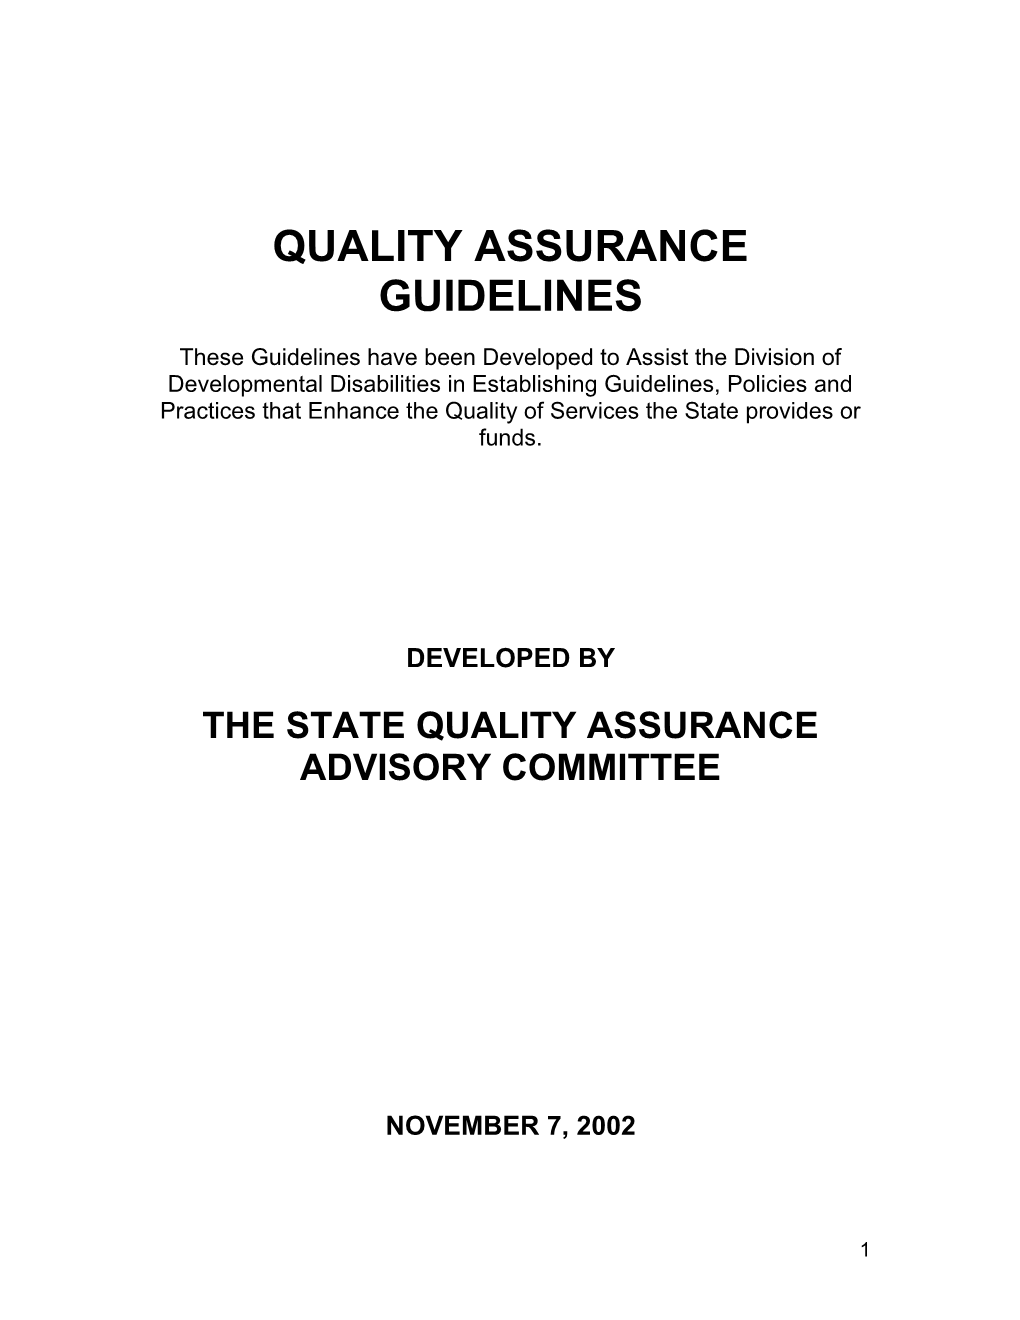 Quality Assurance Guidelines